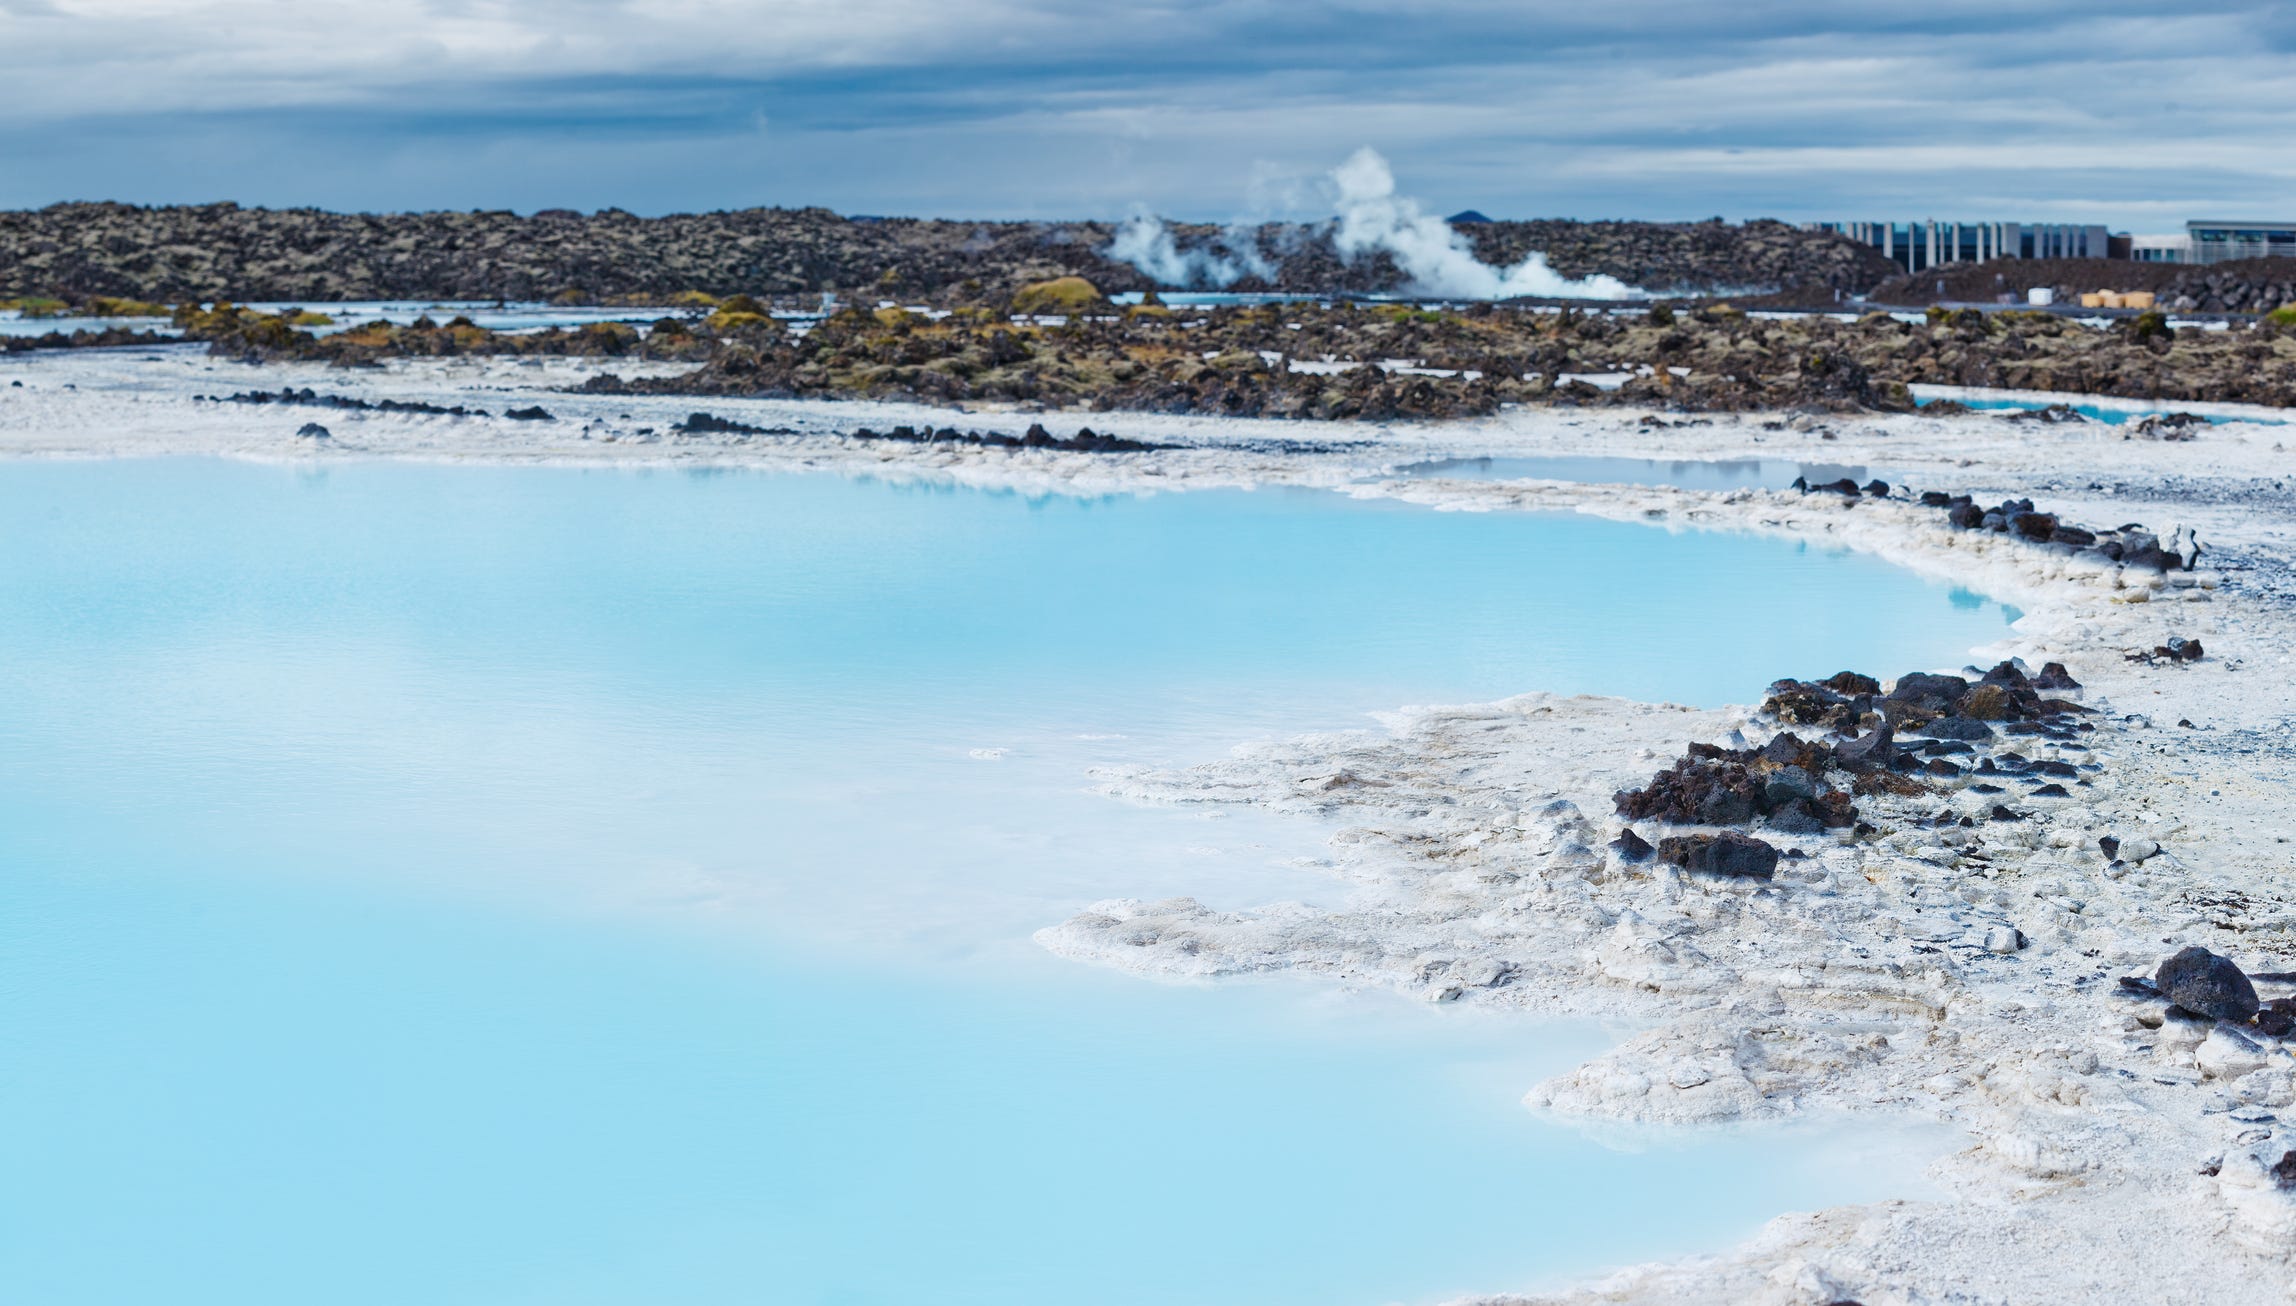 <p>Iceland has waterfalls, thermal lagoons, glaciers, and geysers.</p><p>I was fortunate to visit Iceland during summer when the sun never seemed to set, and I even wore sunglasses at midnight. The extra-long days allowed plenty of time to travel this small country and marvel at its natural attractions.</p><p>I broke records for the number of photos I posted on social media- earning lots of comments from jealous friends, but none can do the place justice.</p><p>Watching nature's fury shoot water hundreds of feet up (geysers) or hundreds of feet down (waterfalls) was mesmerizing and a reminder of our precious earth. </p><p>After a long day of exploring, there's nothing better place than a warm thermal bath in the famous <a href="https://www.businessinsider.com/blue-lagoon-photos-iceland-reality-vs-expectation-2018-9">Blue Lagoon</a>.</p>